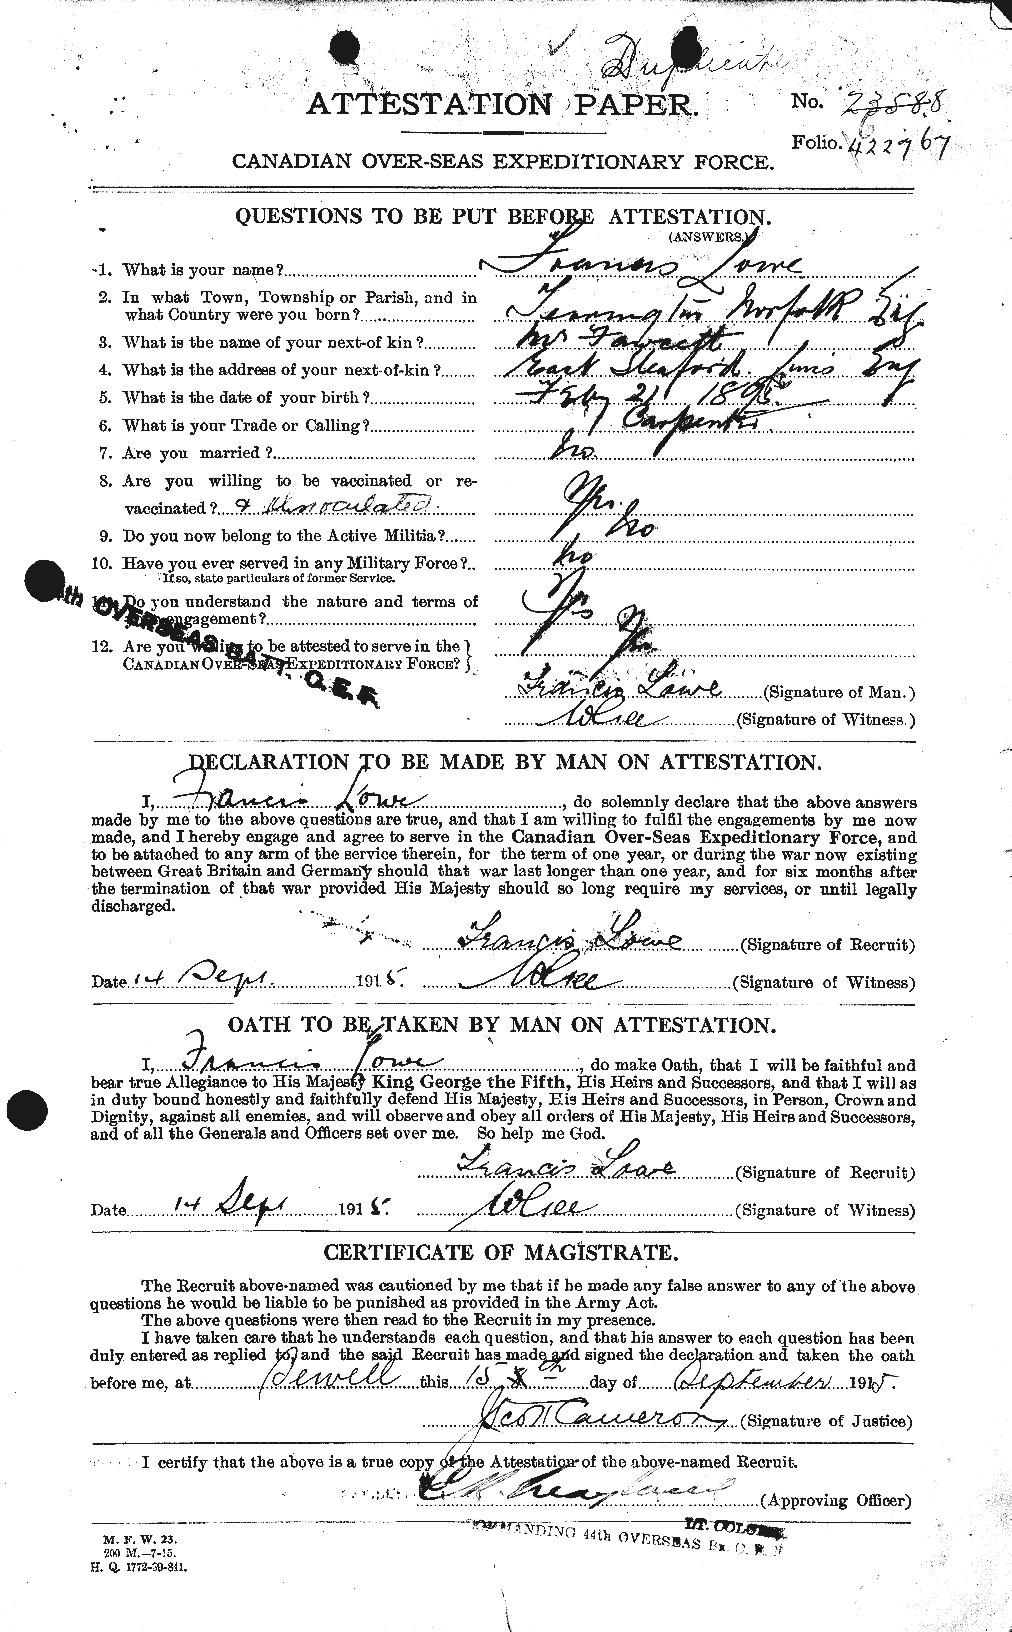 Personnel Records of the First World War - CEF 469550a